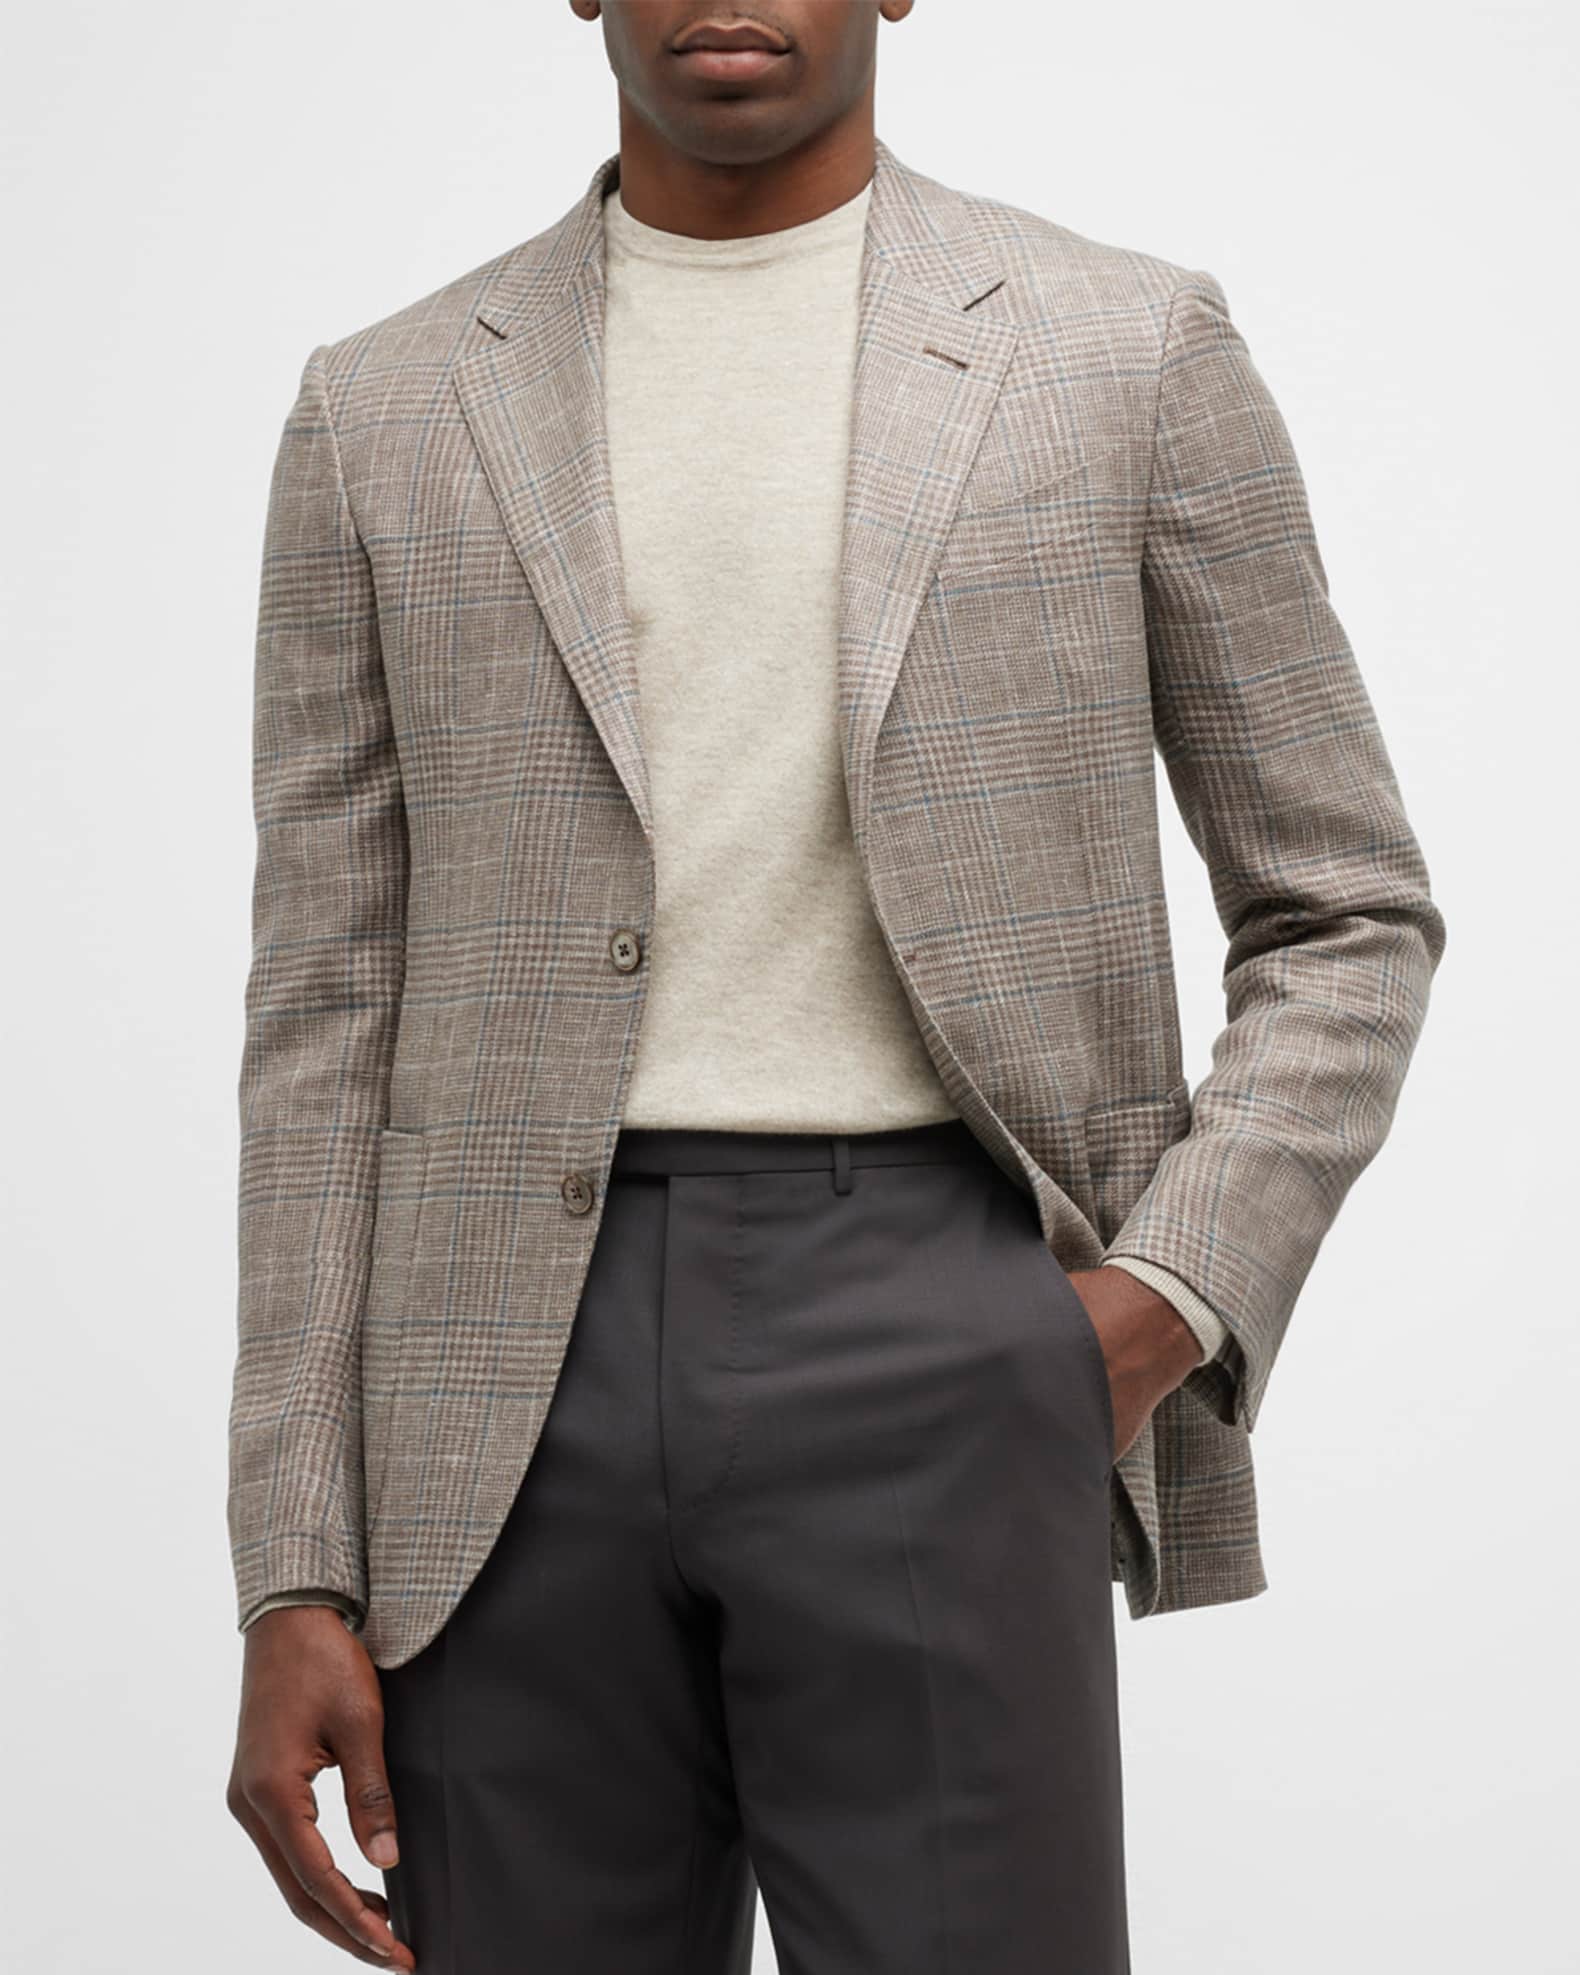 ZEGNA Men's Prince of Wales Single-Breasted Sport Coat | Neiman Marcus